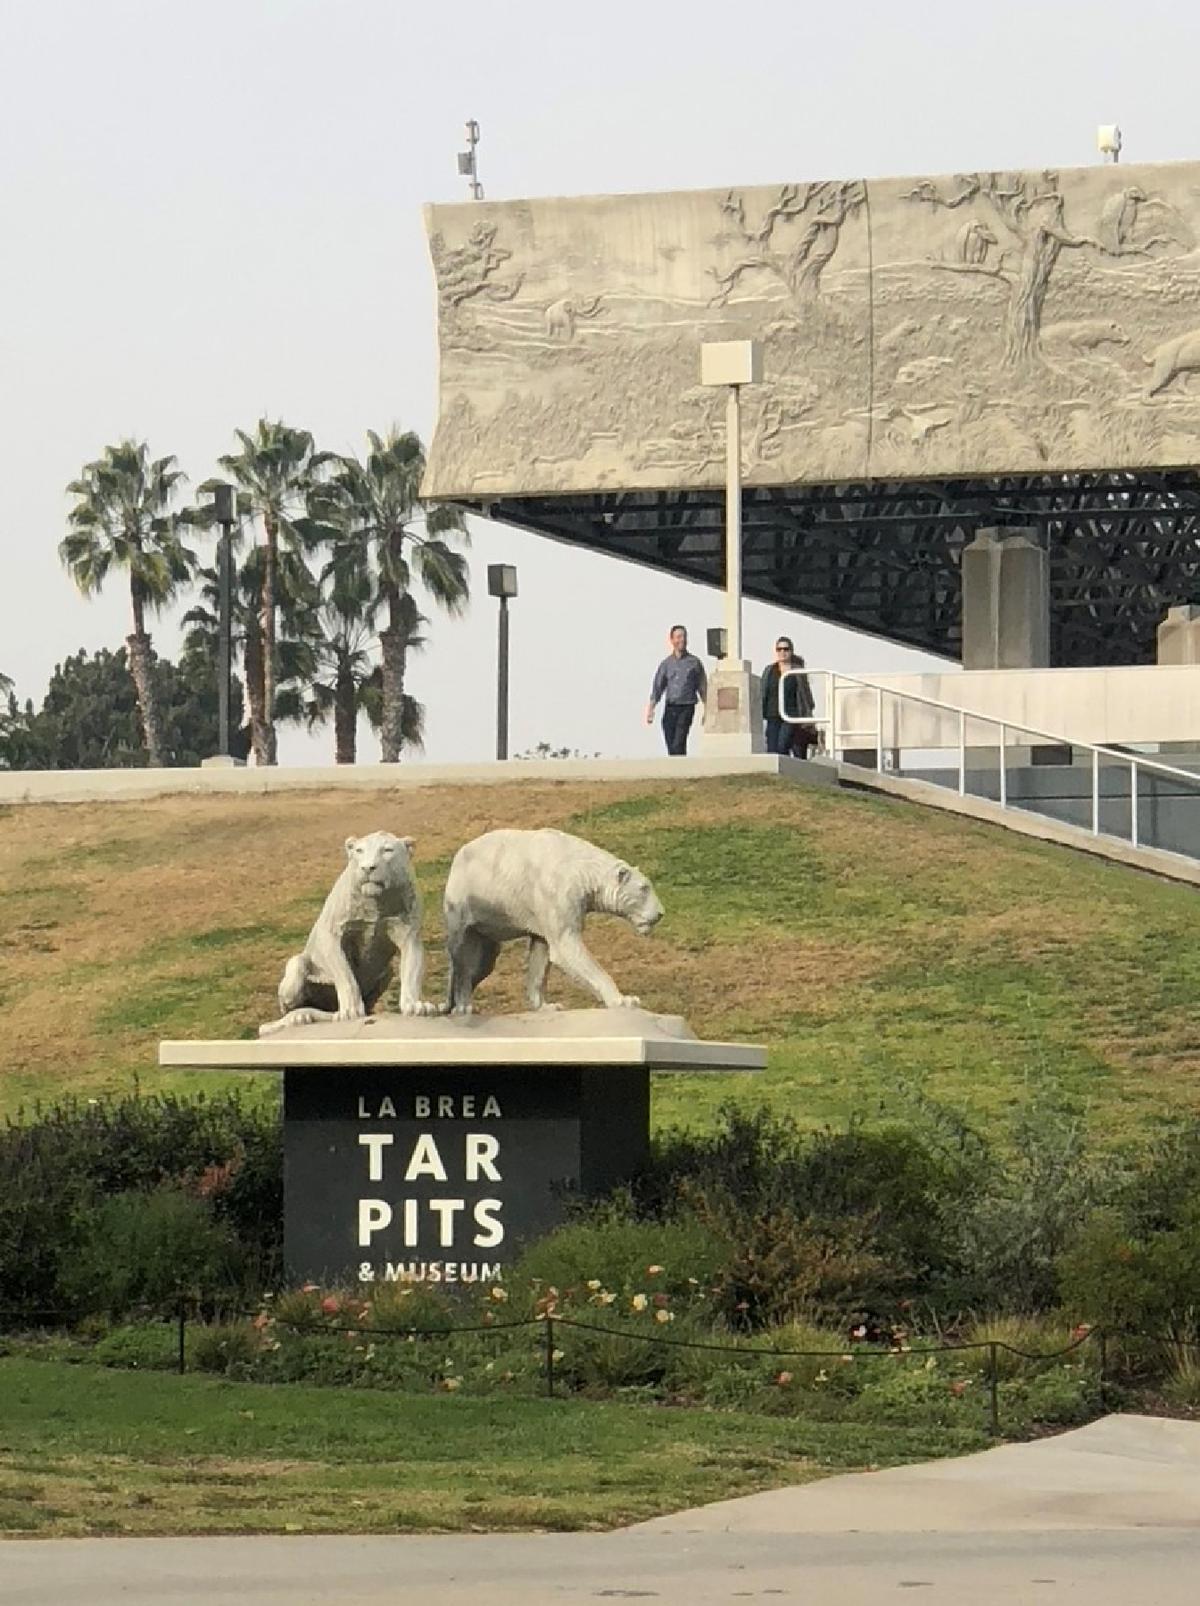 The museum at the La Brea Tar Pits in Los Angeles, California, contains instructional exhibits about animal life in prehistoric times. (Photo courtesy of Bill Neely)